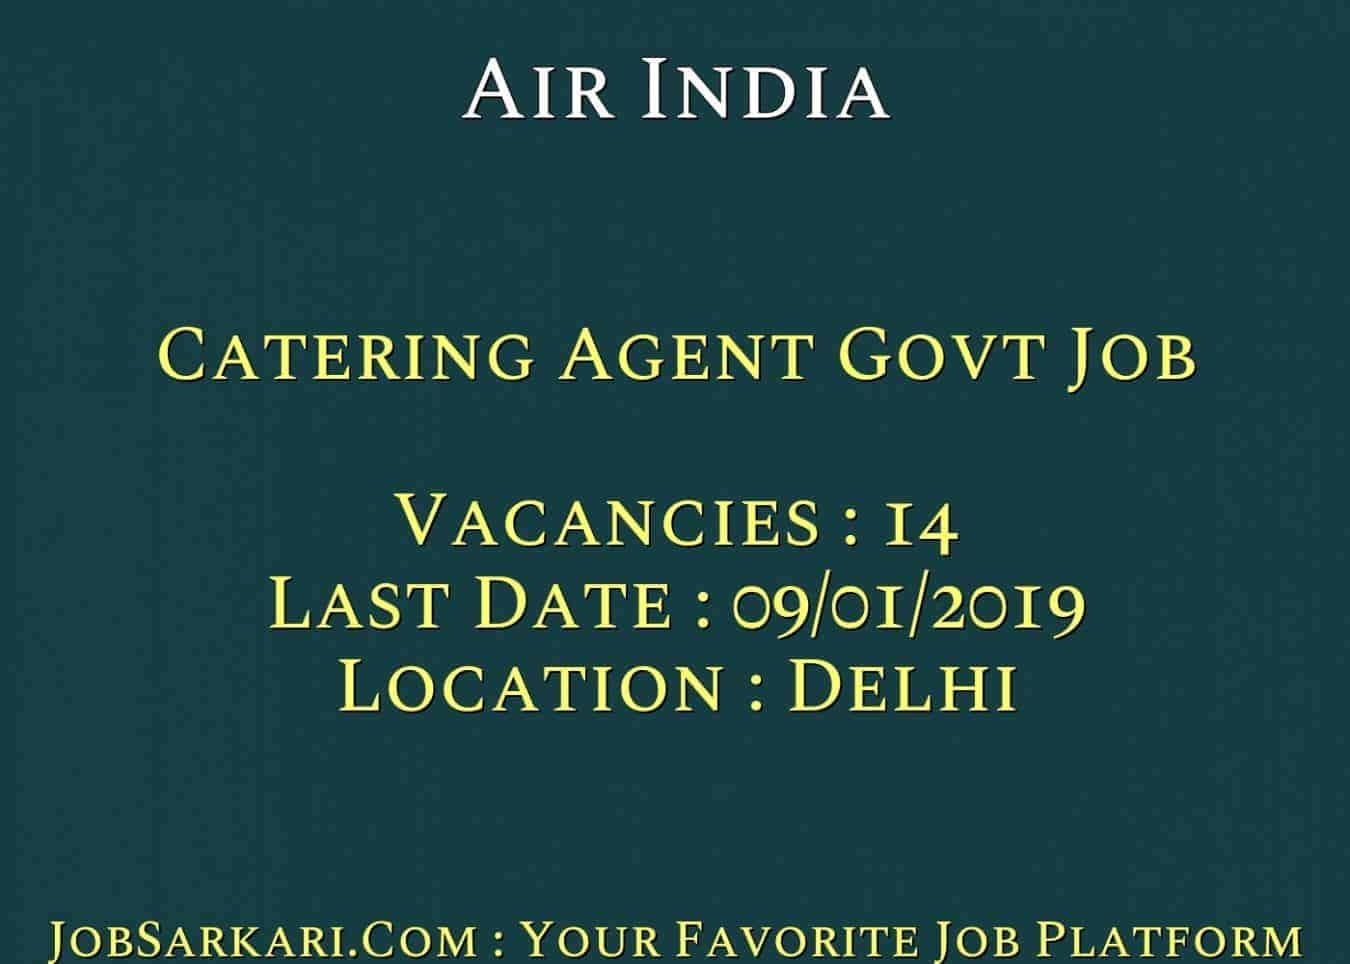 Air India Recruitment 2018 for Catering Agent Govt Job